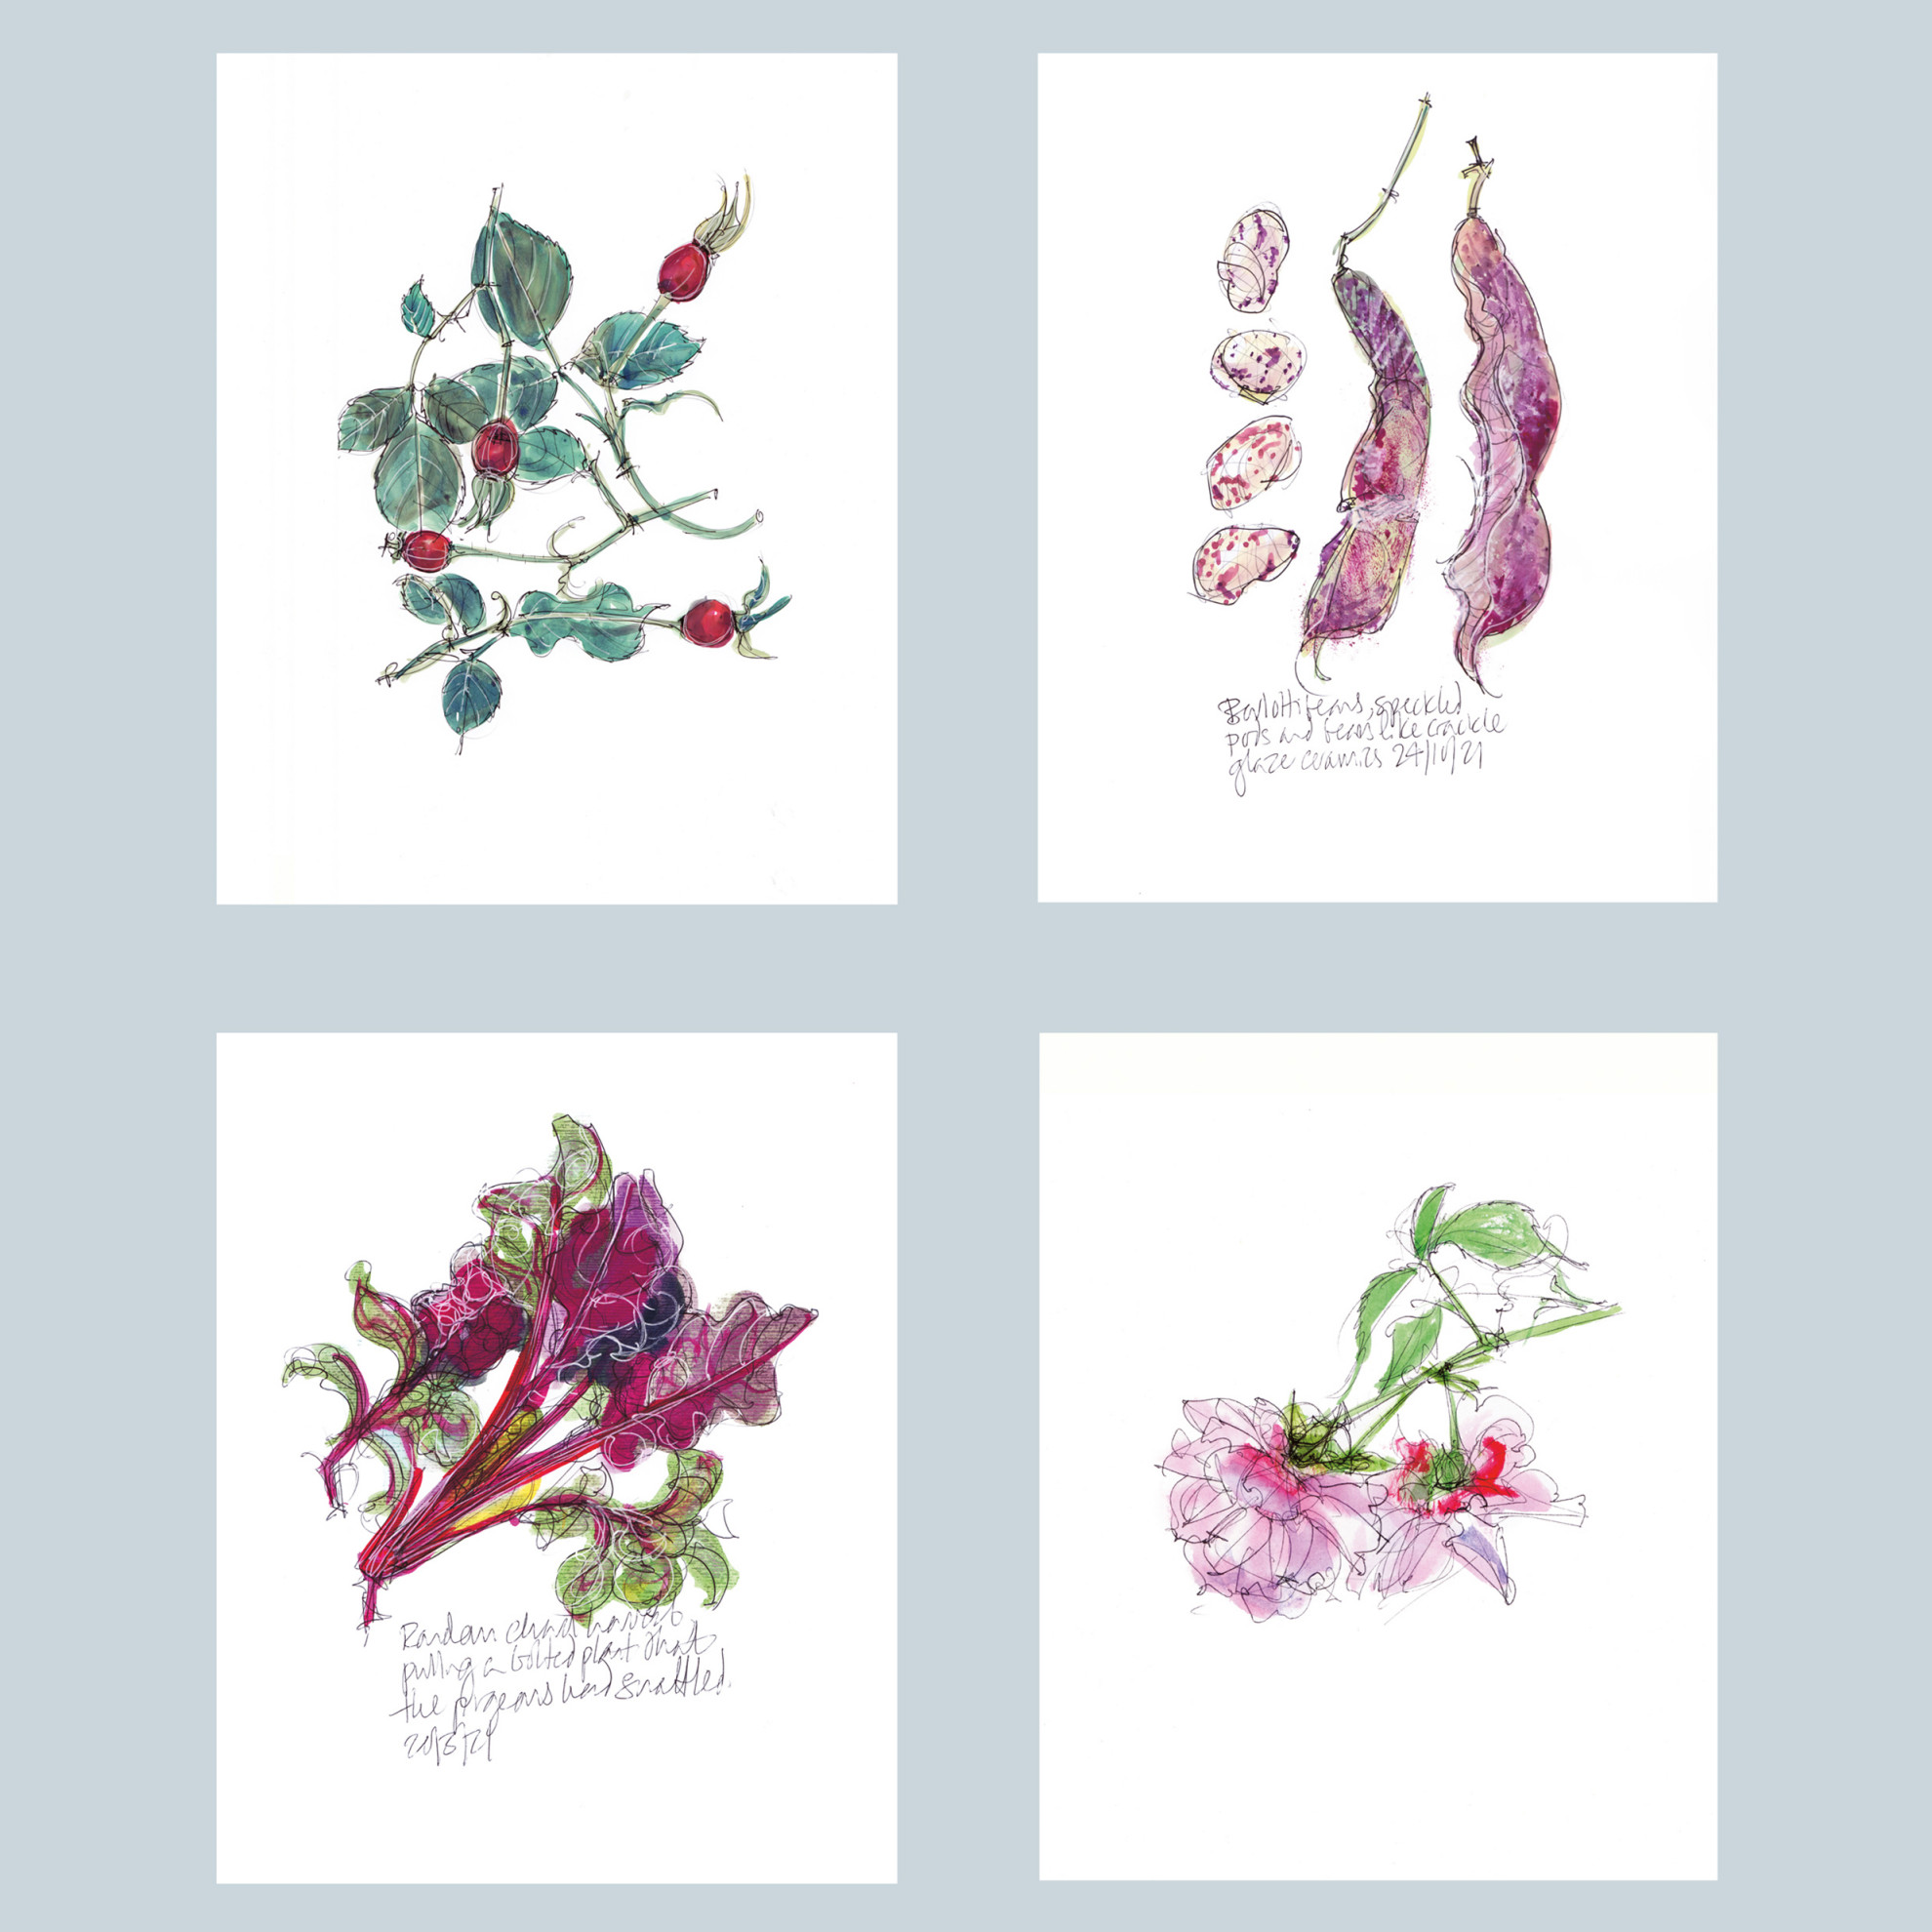 Chard beans roses prints by Lydia Thornley